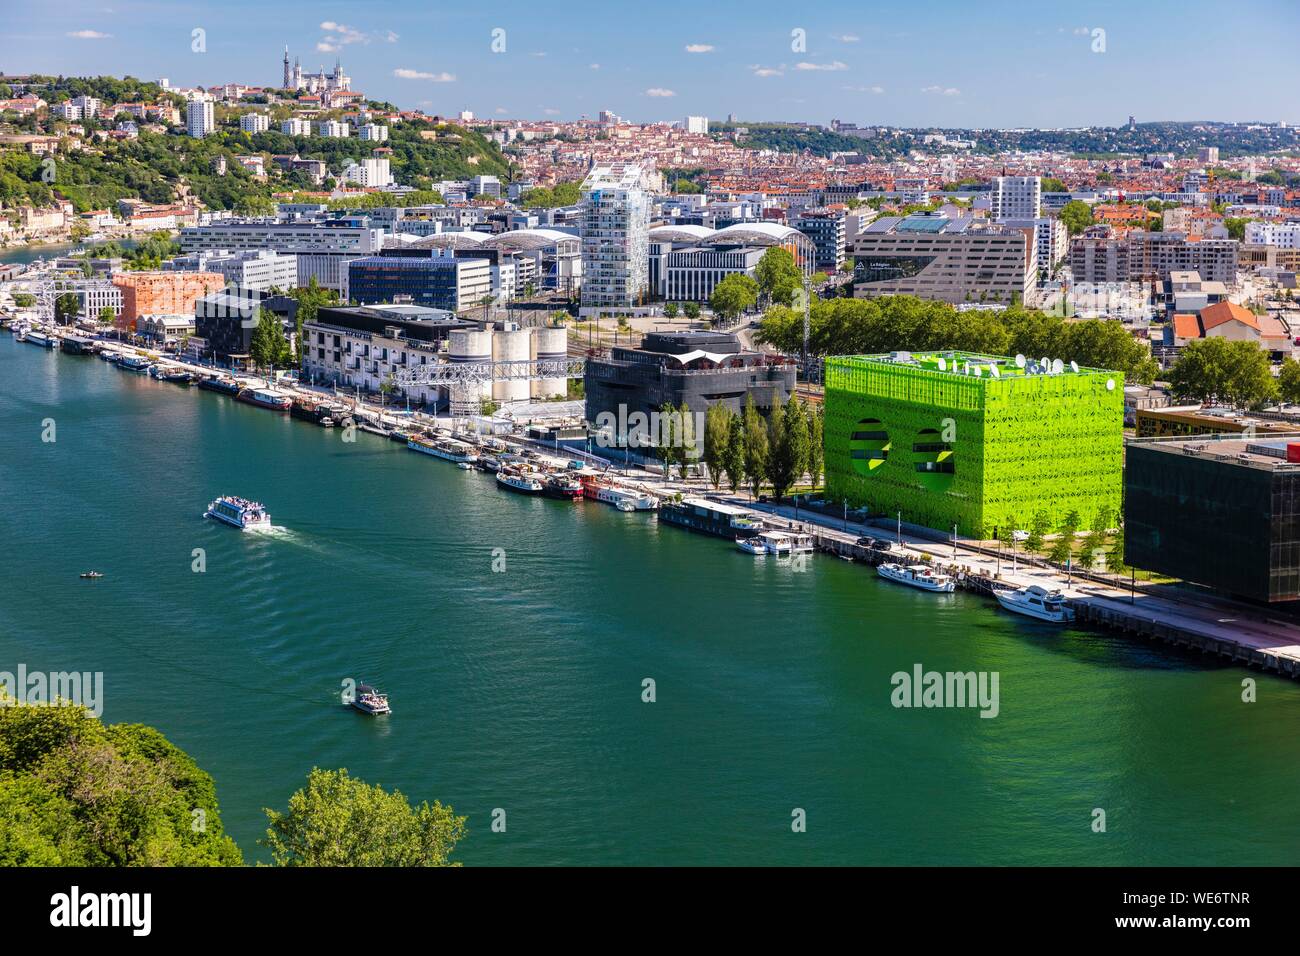 France, Rhone, Lyon, district of La Confluence in the south of the peninsula, first French quarter certified sustainable by the WWF, view of the quai Rambaud along the old docks with the Green Cube, the Sucriere, the Ycone tower and Notre Dame de Fourviere Basilica Stock Photo